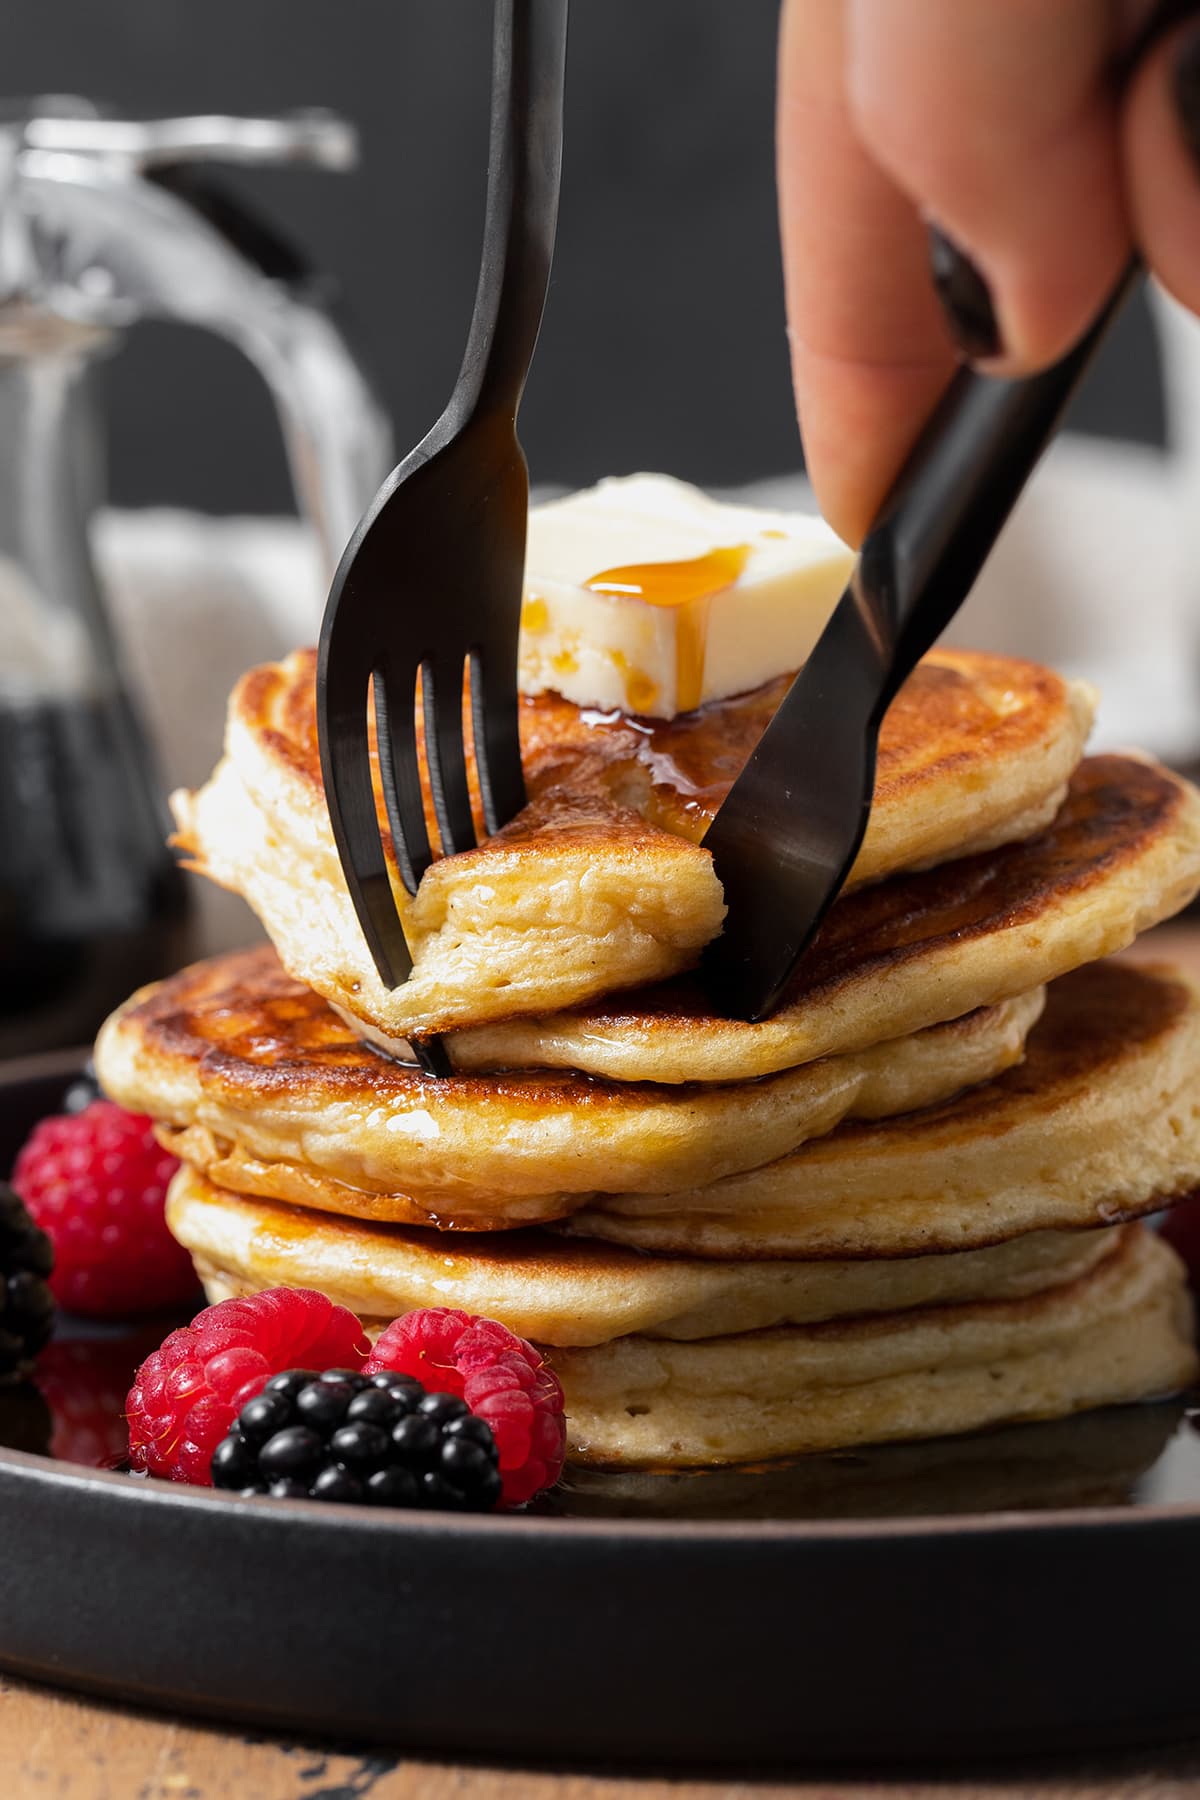 Greek Yogurt Pancakes stacked on a black plate. Black fork and knife cutting out a piece of the stack.